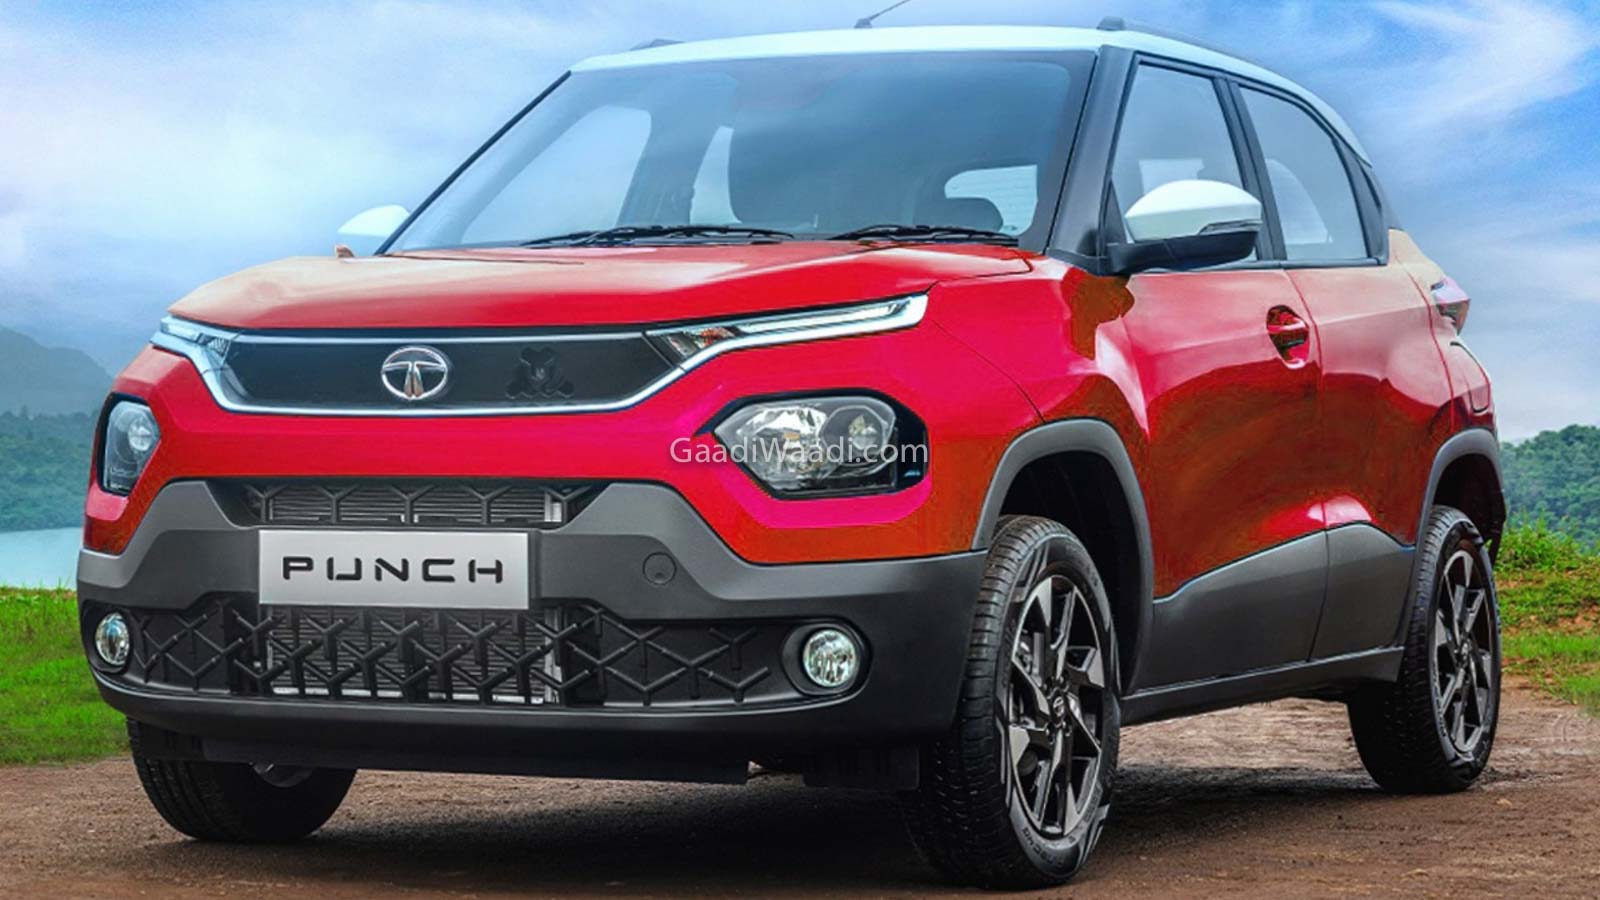 Tata Punch Is Going To Be The Best Looking Car For Under 7 Lakh?